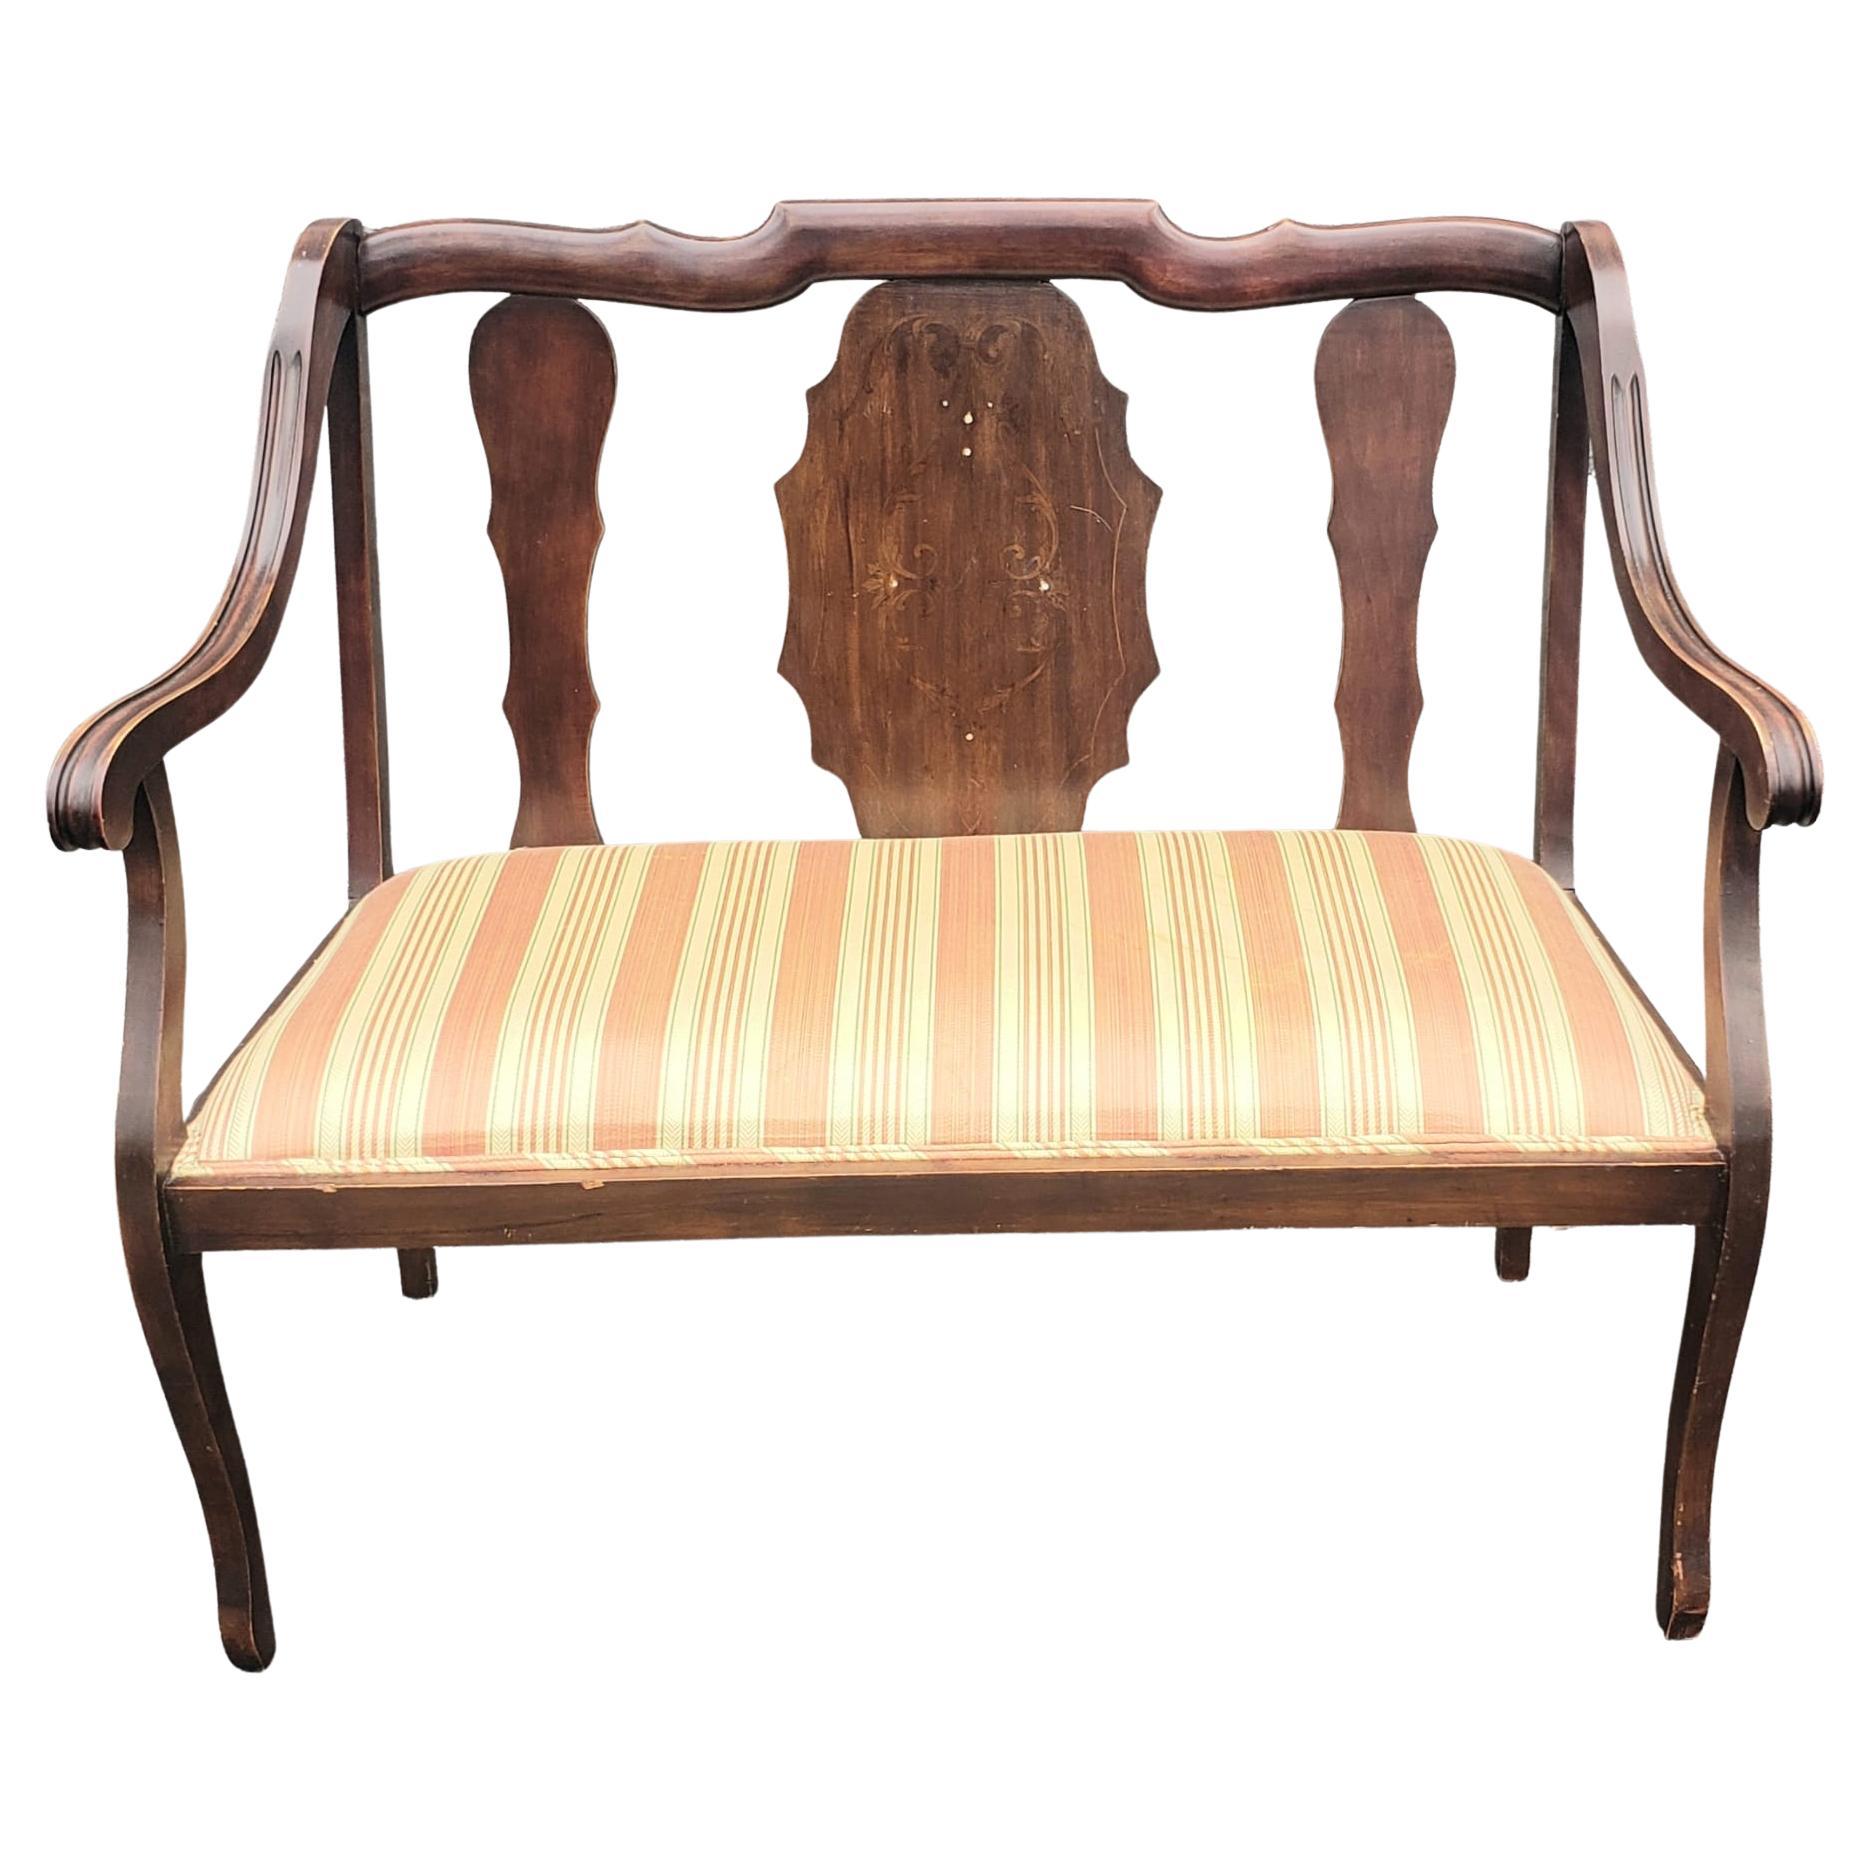 George III Style Walnut with inlay and Upholstered Seat settee in good vintage condition.
Measures 41.5